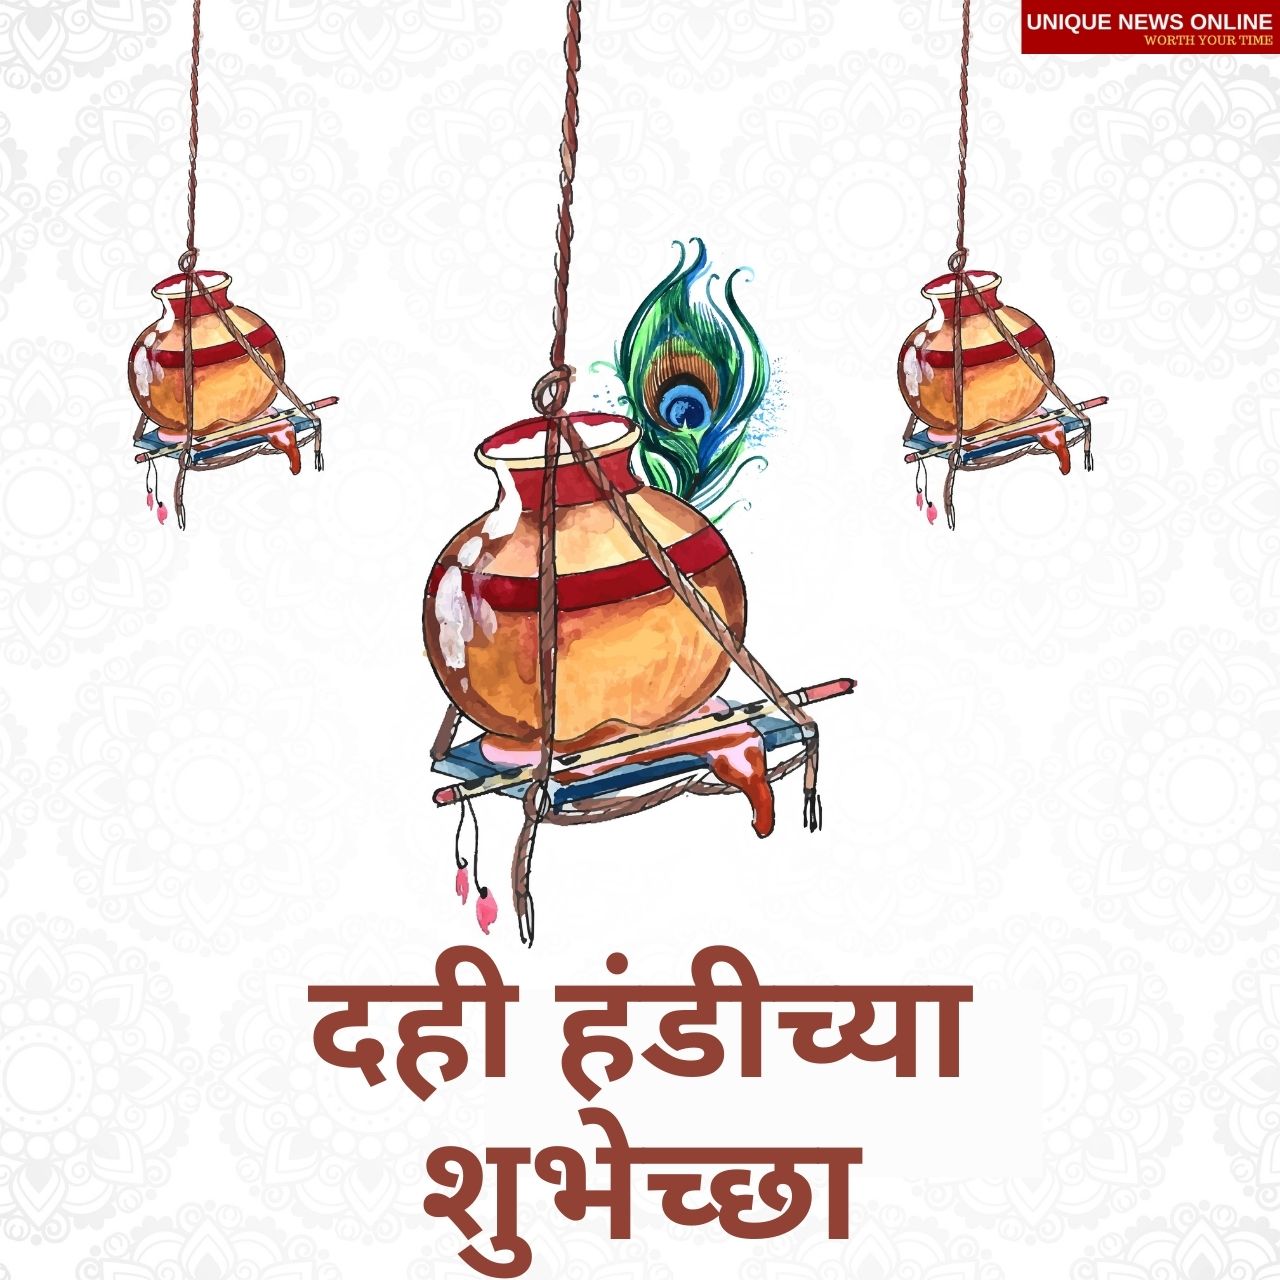 Happy Dahi Handi Marathi Wishes Images Png Poster Quotes Greetings